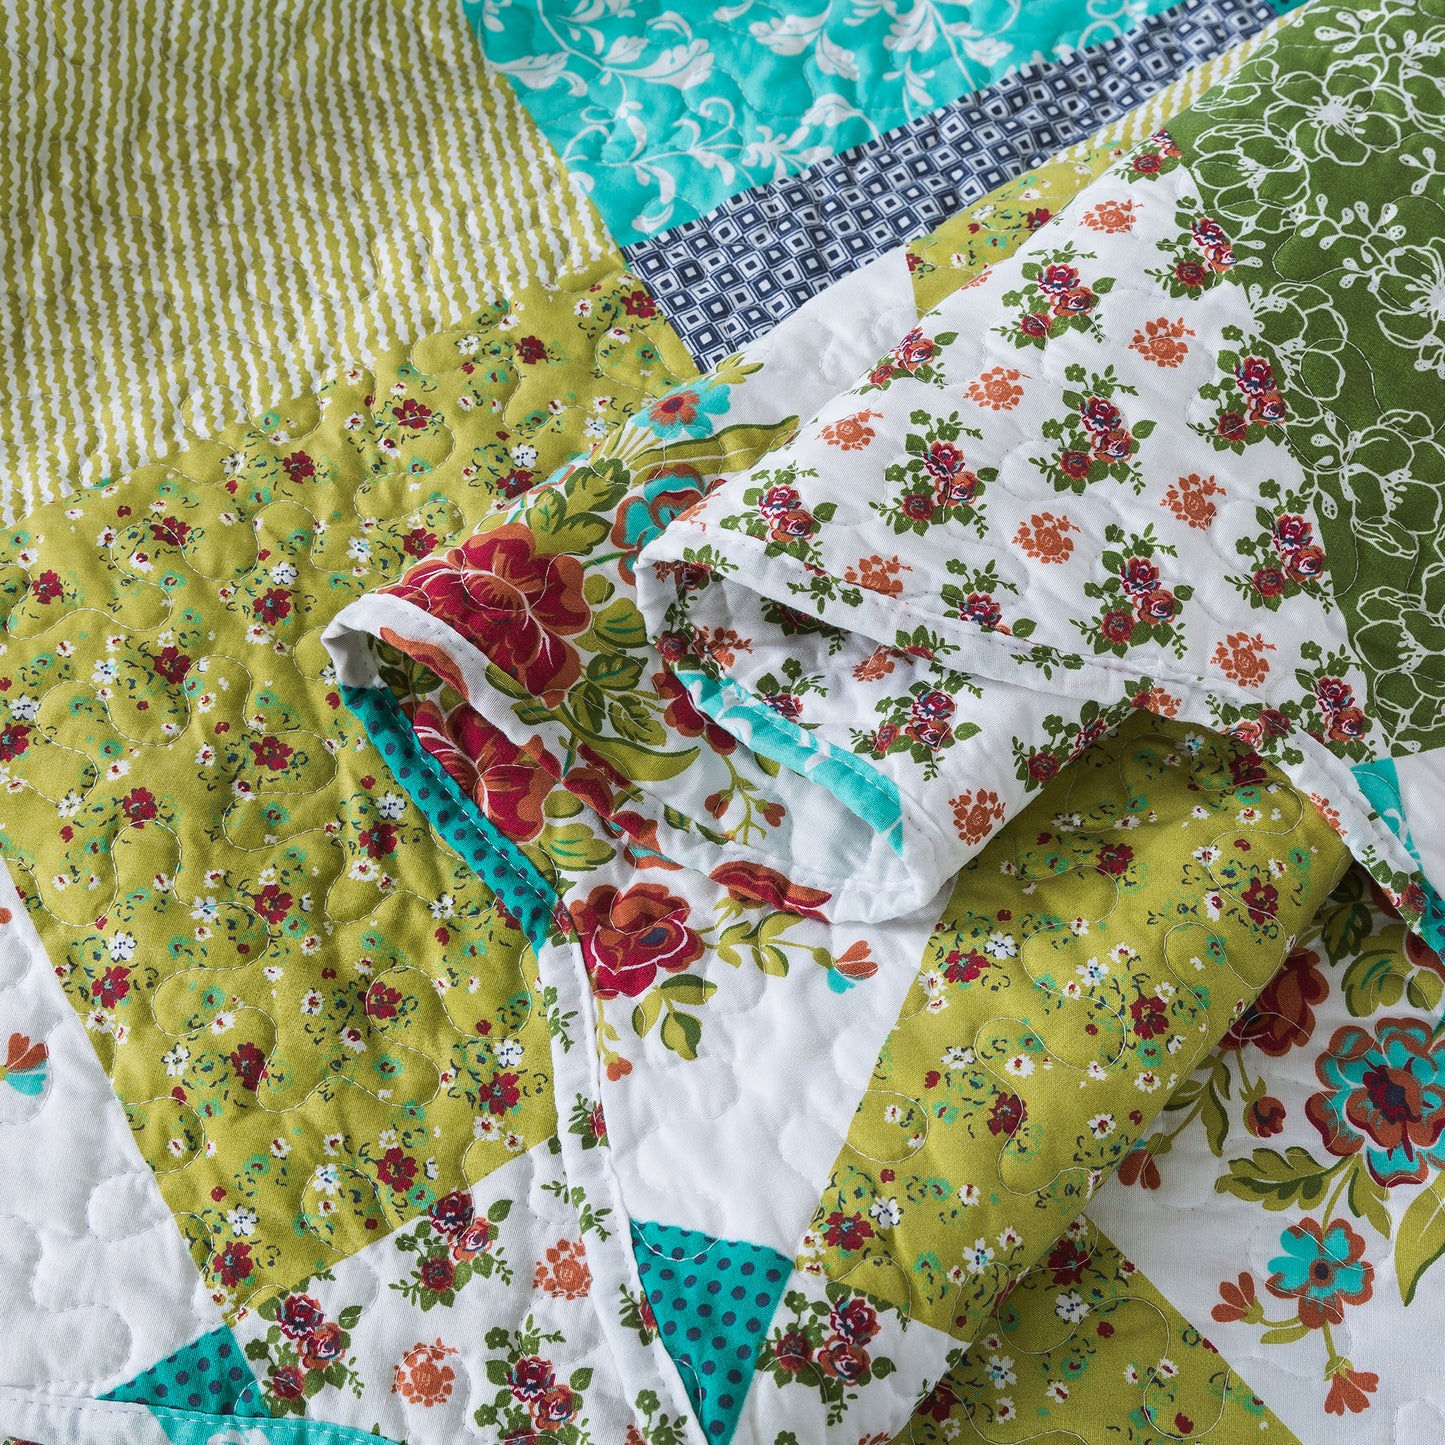 Quilt Bedspread Sets-Checkered Floral Reversible Coverlet Set,Queen/King Size